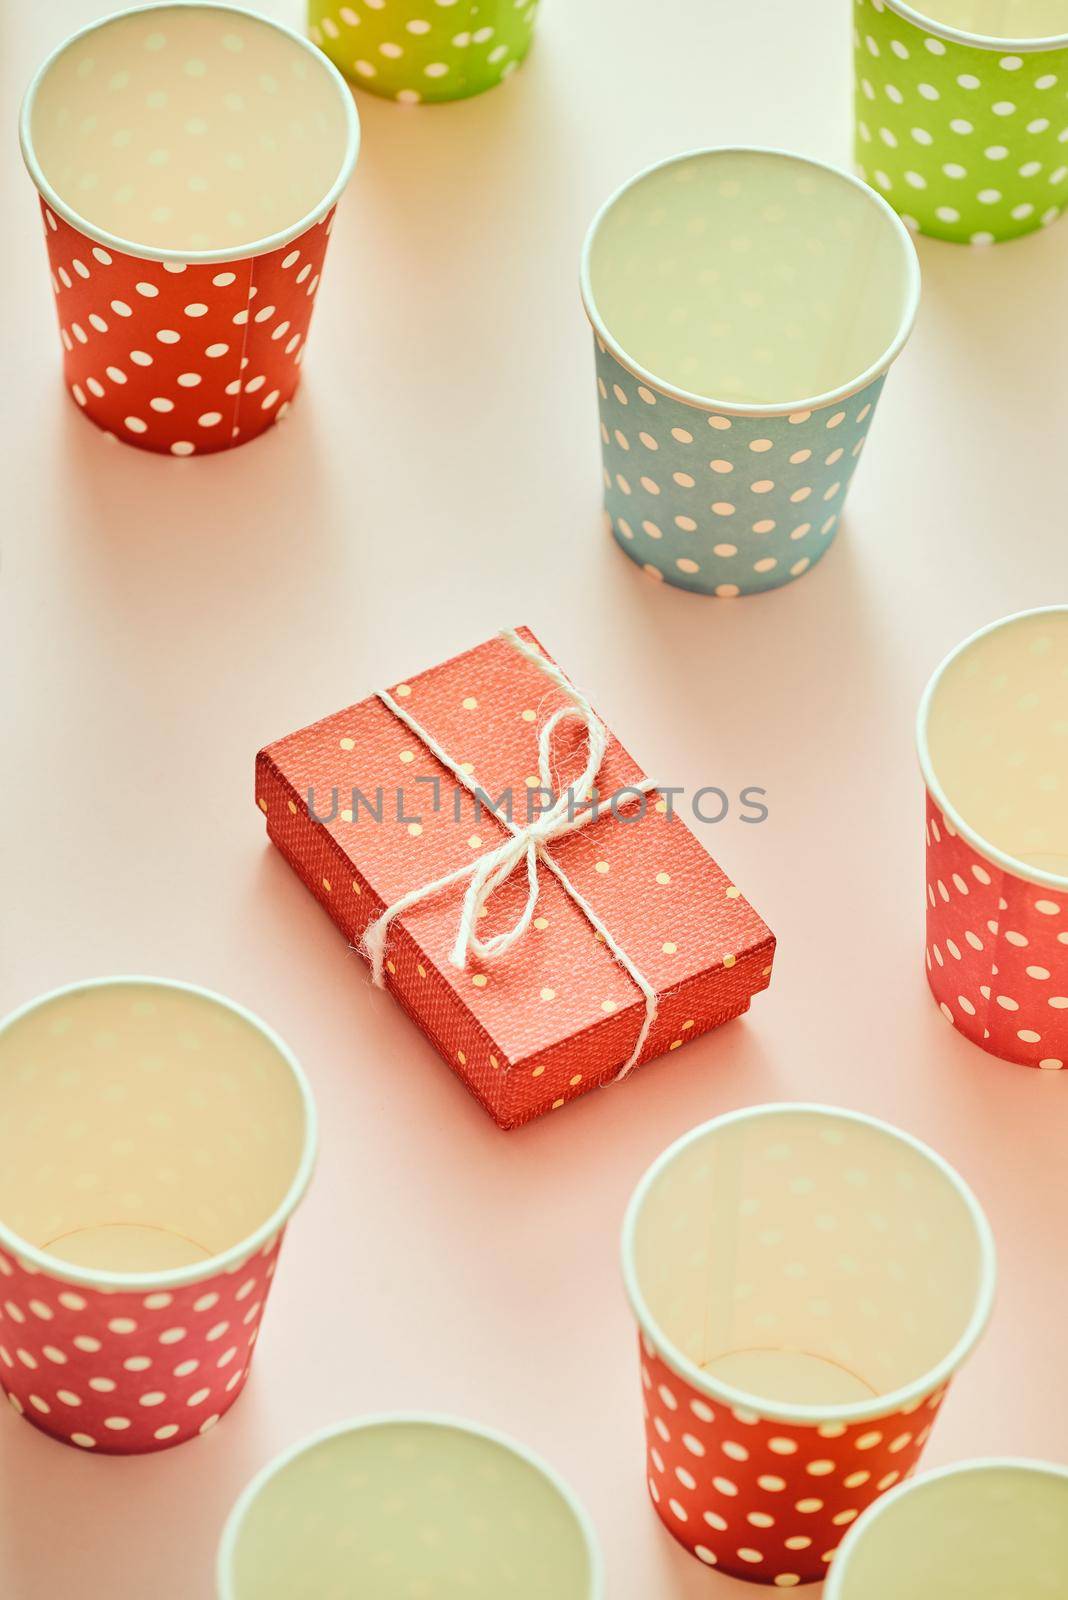 Cups and gift boxes wrapped in polka dots colorful paper by makidotvn